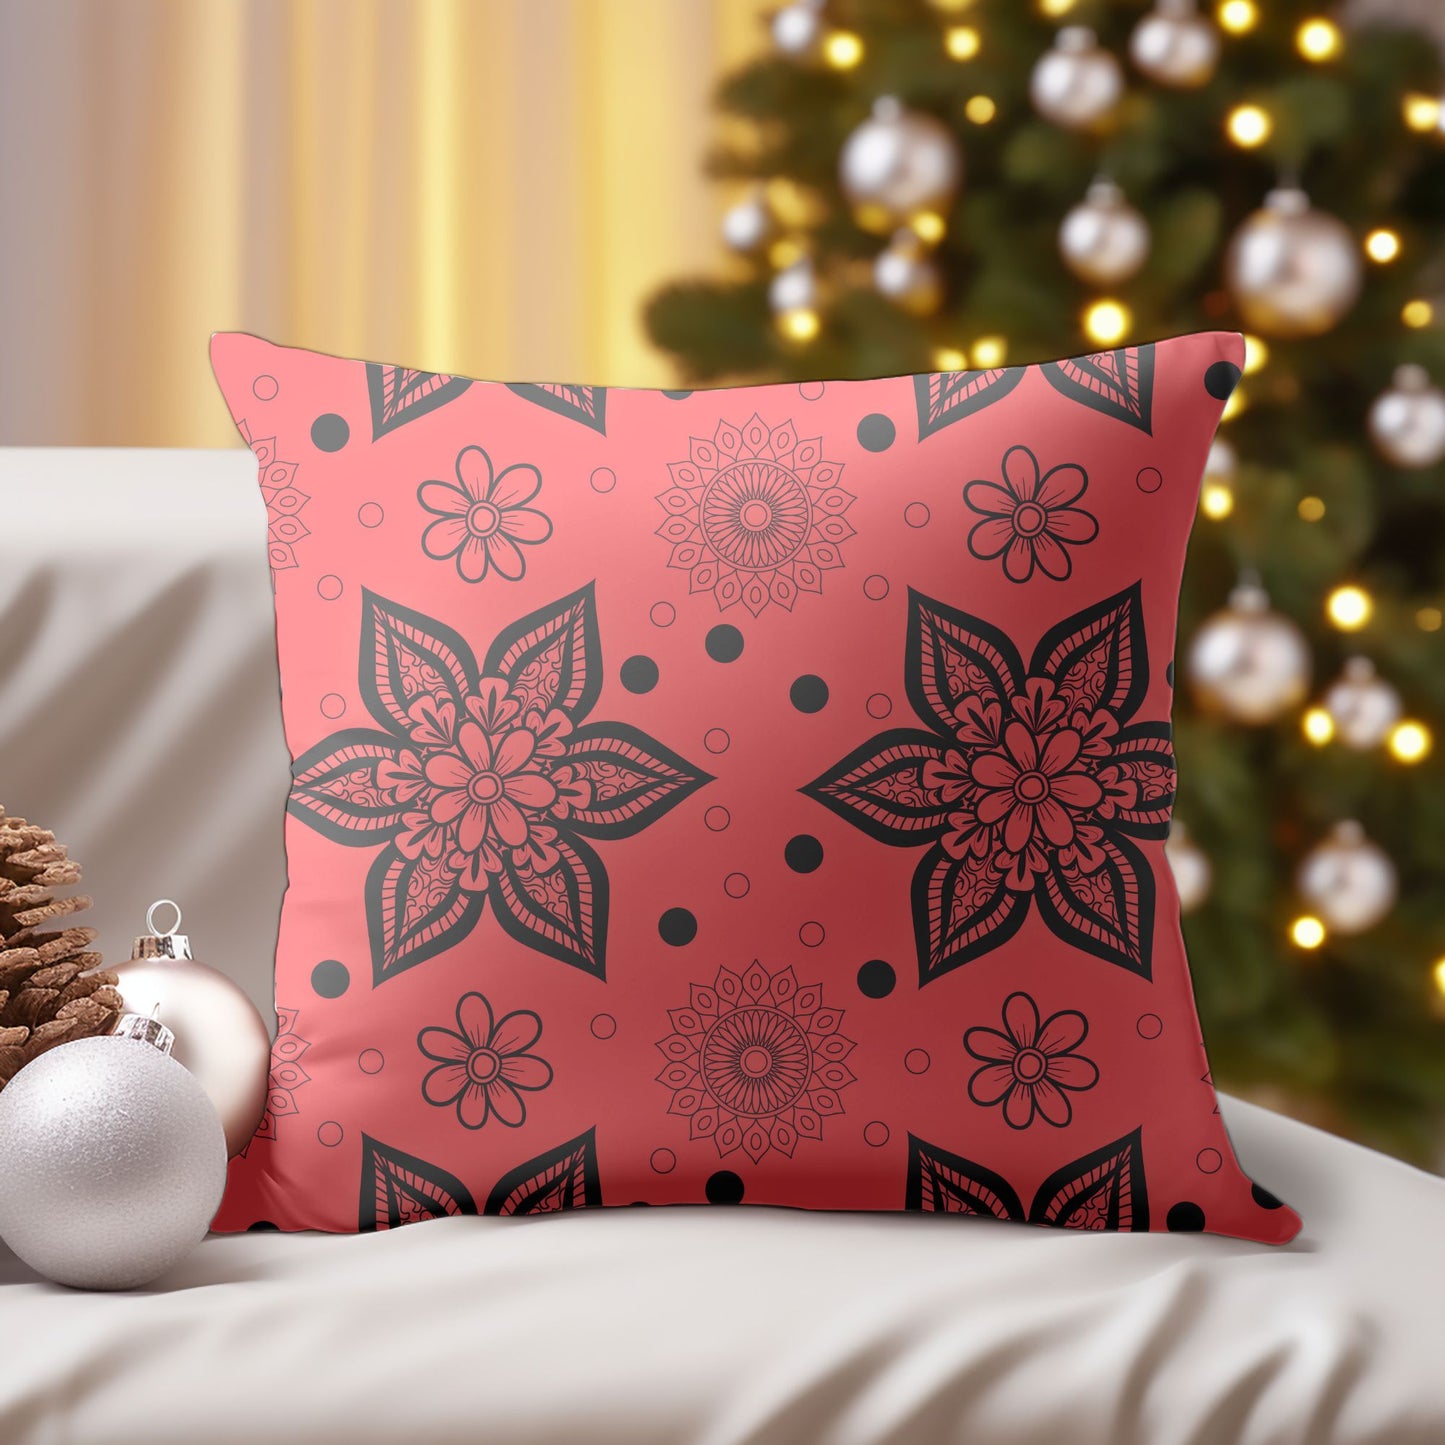 Charming Red Christmas Pillow with Santa Claus Design